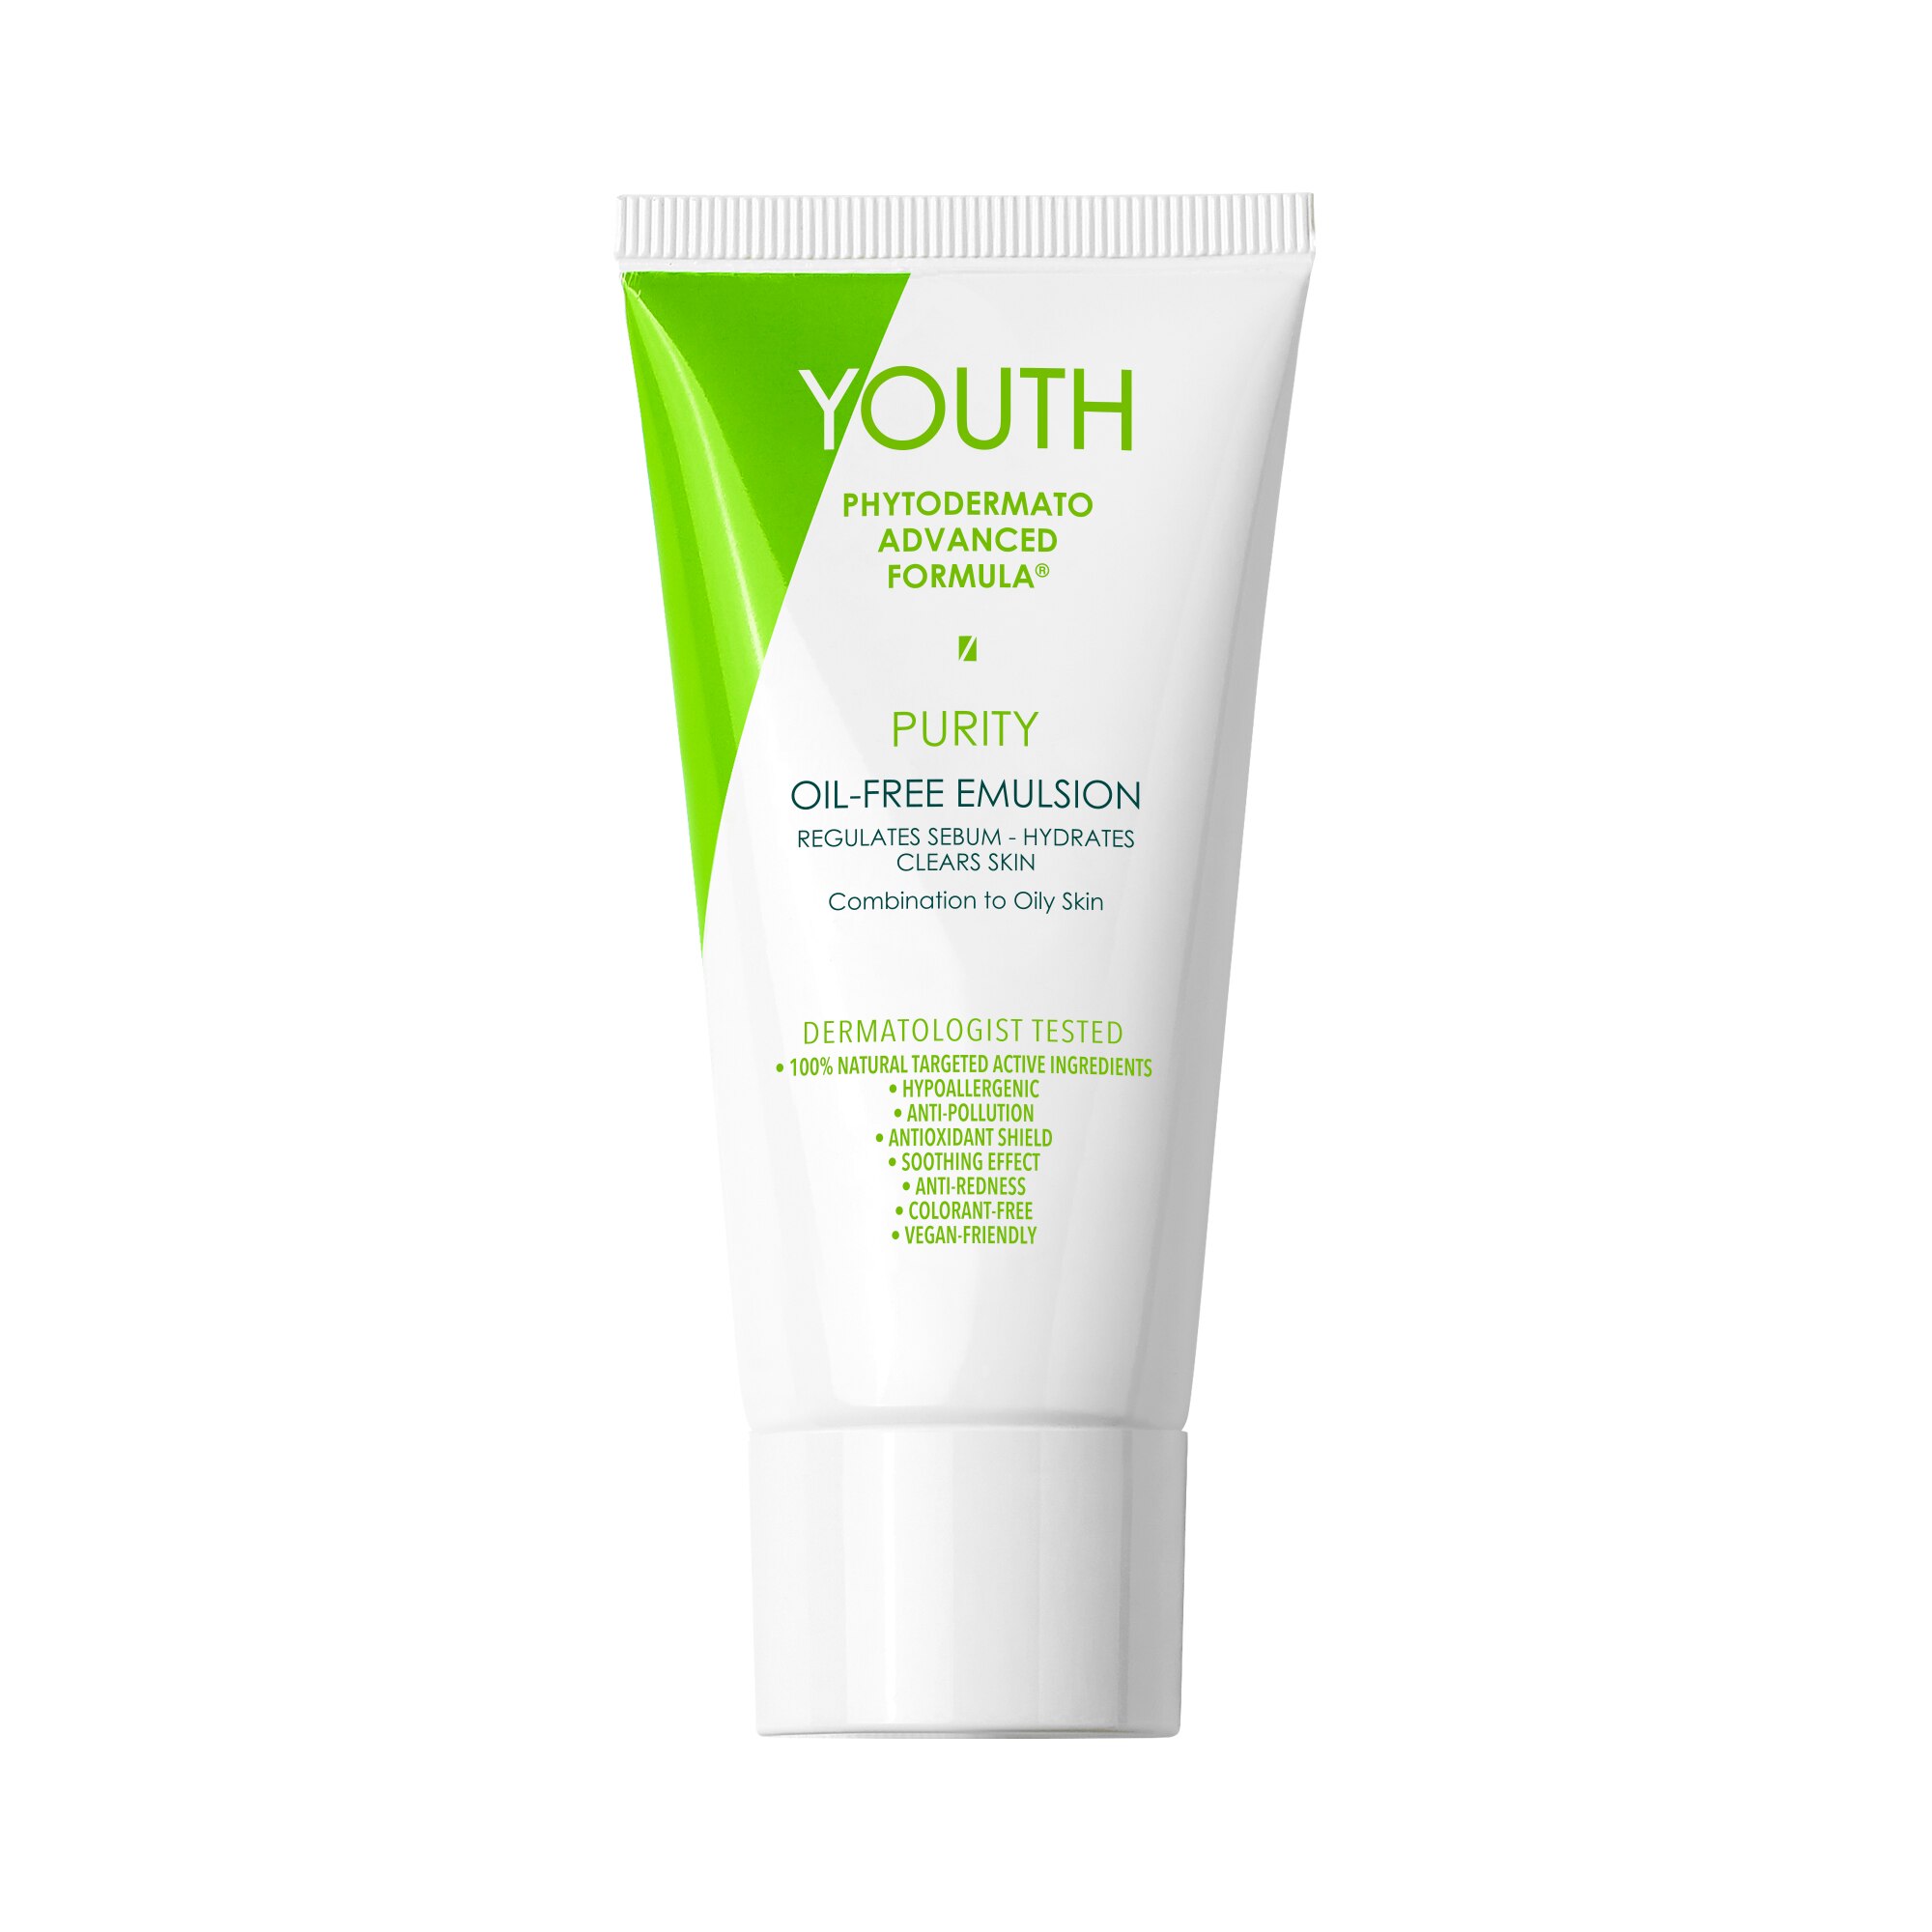 YOUTH Purity Oil-Free Emulsion, 1.8 OZ